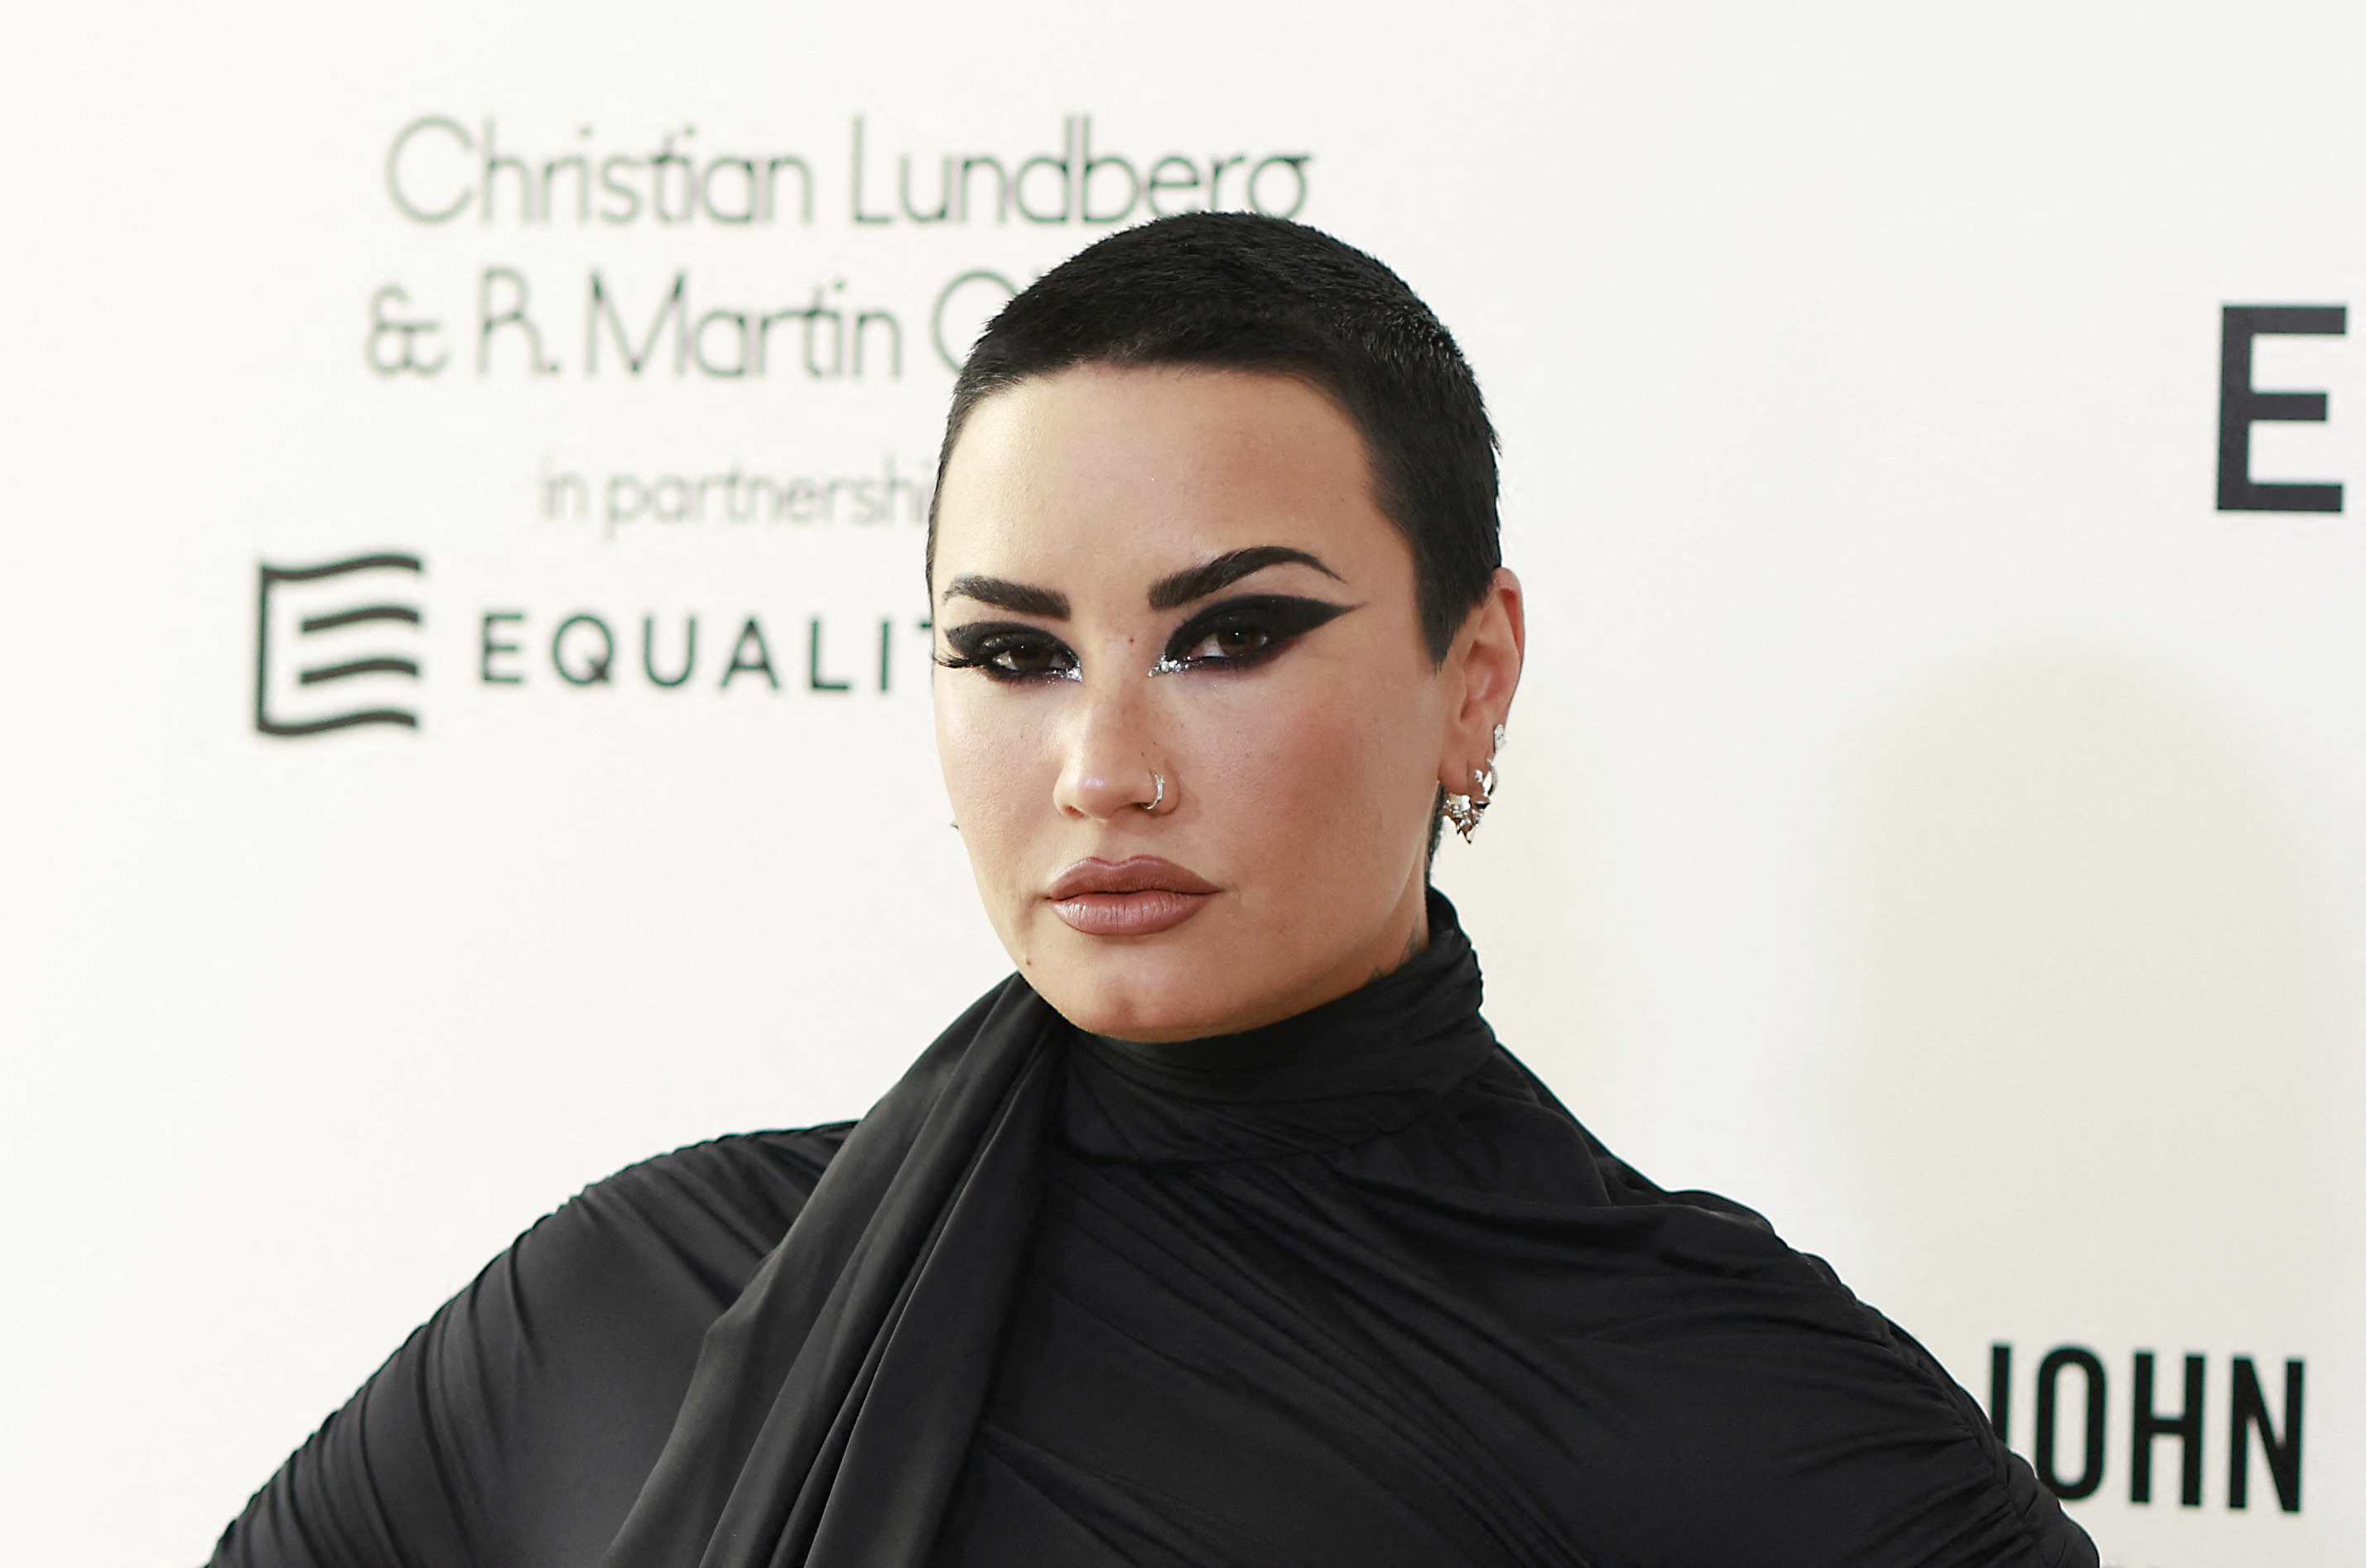 Demi Lovato posing at an event with a short black buzzcut, dark eyeliner, and a black turtleneck